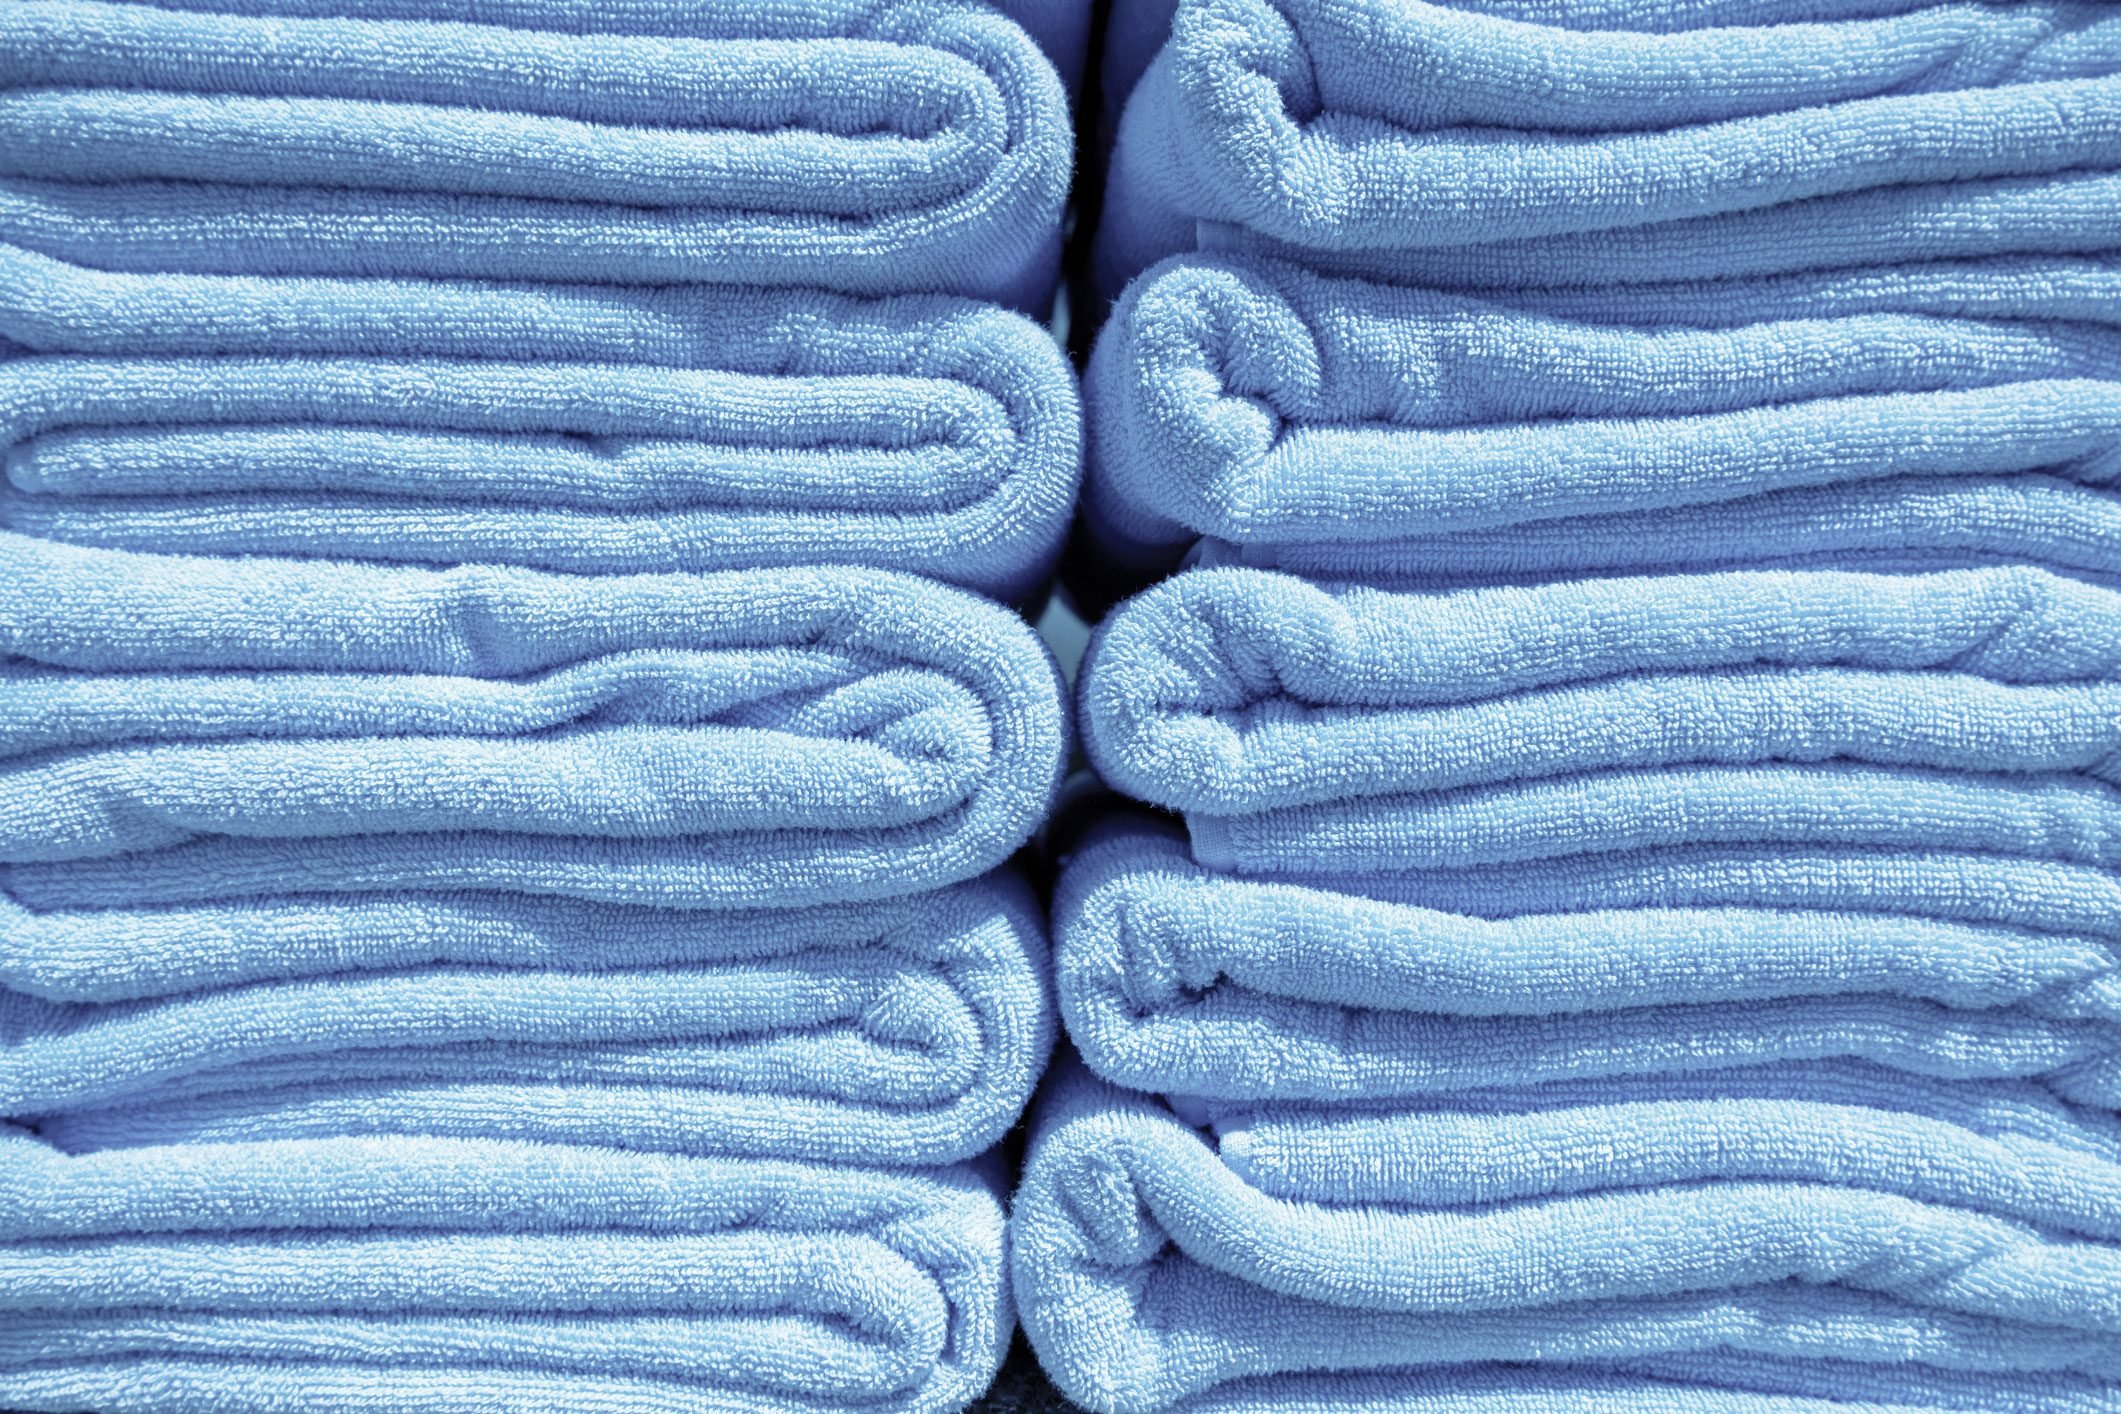 My Pillow Towels Review - Do they really work? 